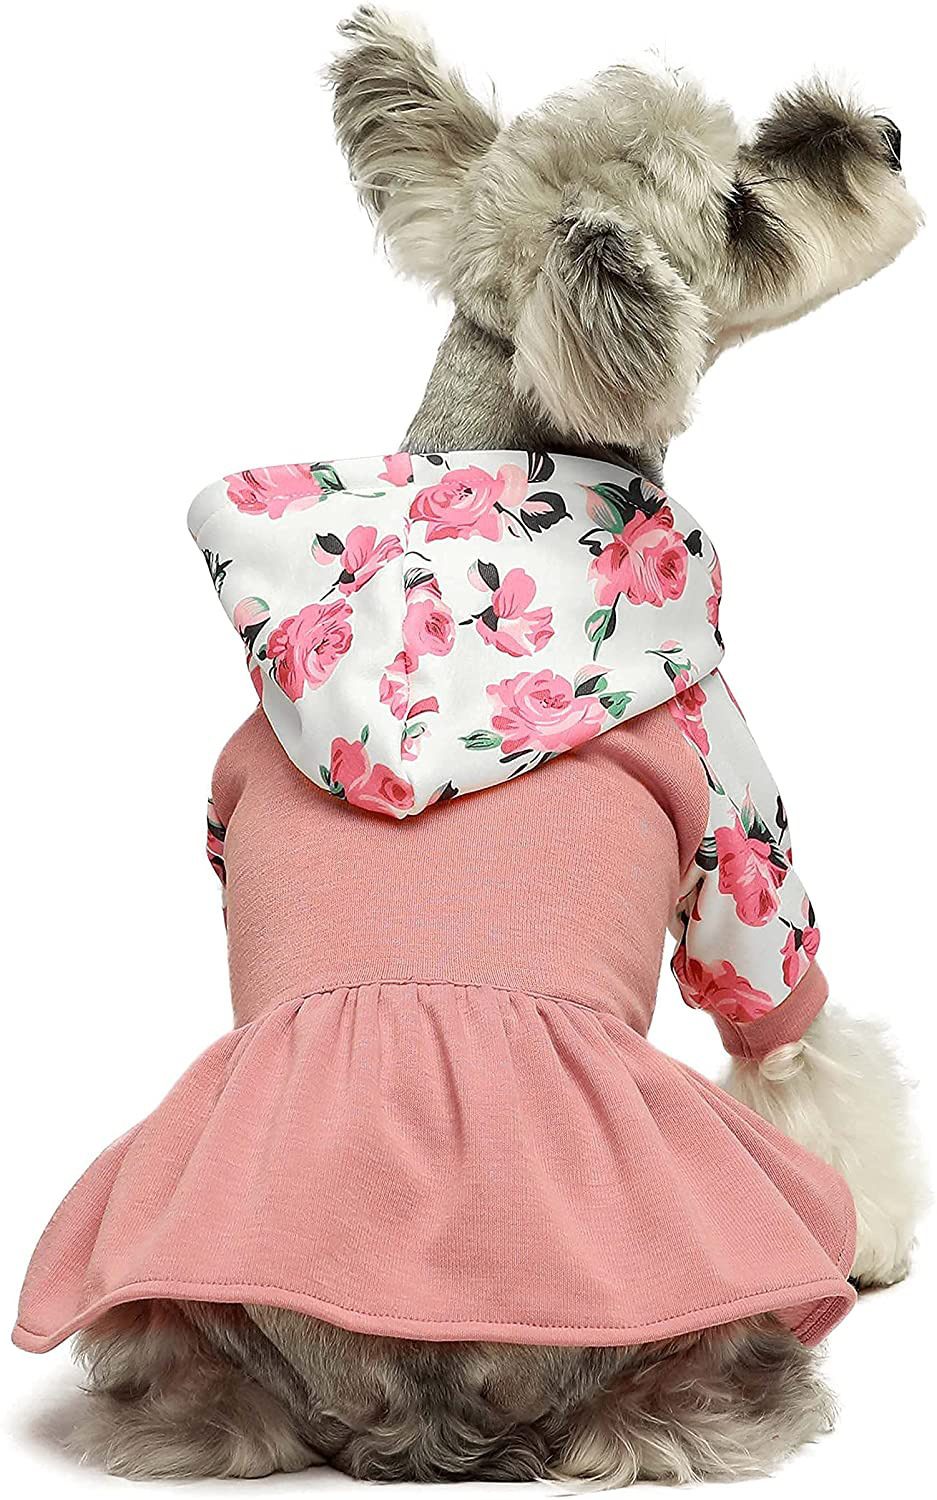 Fitwarm Floral Dog Clothes Dog Hoodie Dresses Breathable Skirt Girl Doggie Dress Puppy Outfits Cat Sweatshirt Apparel